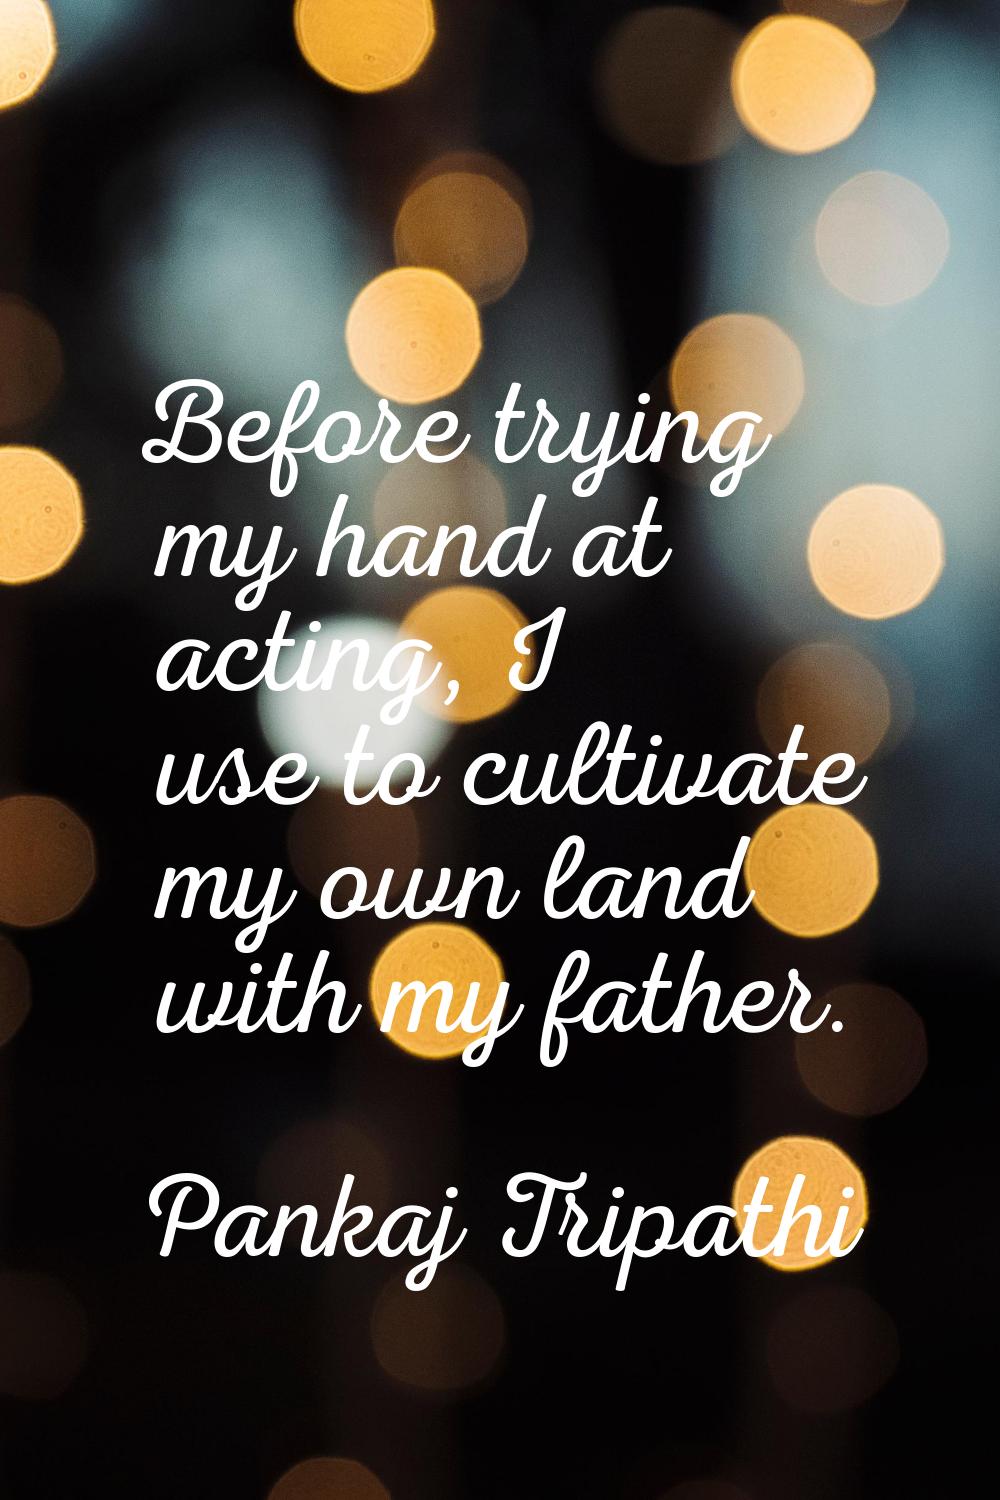 Before trying my hand at acting, I use to cultivate my own land with my father.